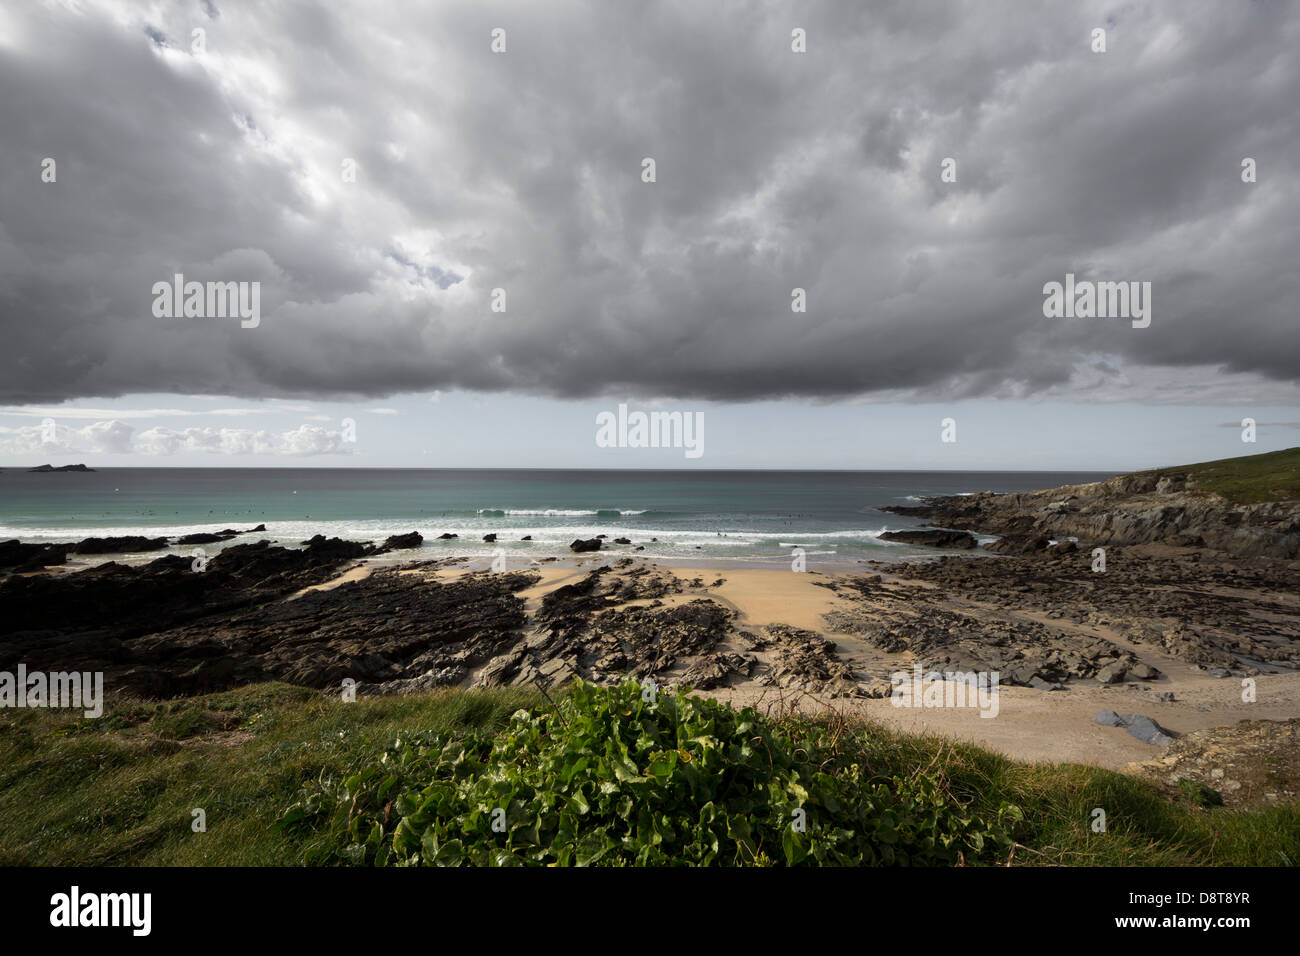 FISTRAL BEACH, NEWQUAY, CORNWALL, UK. Fistral beach on a cloudy day with a dramatic sky. Stock Photo